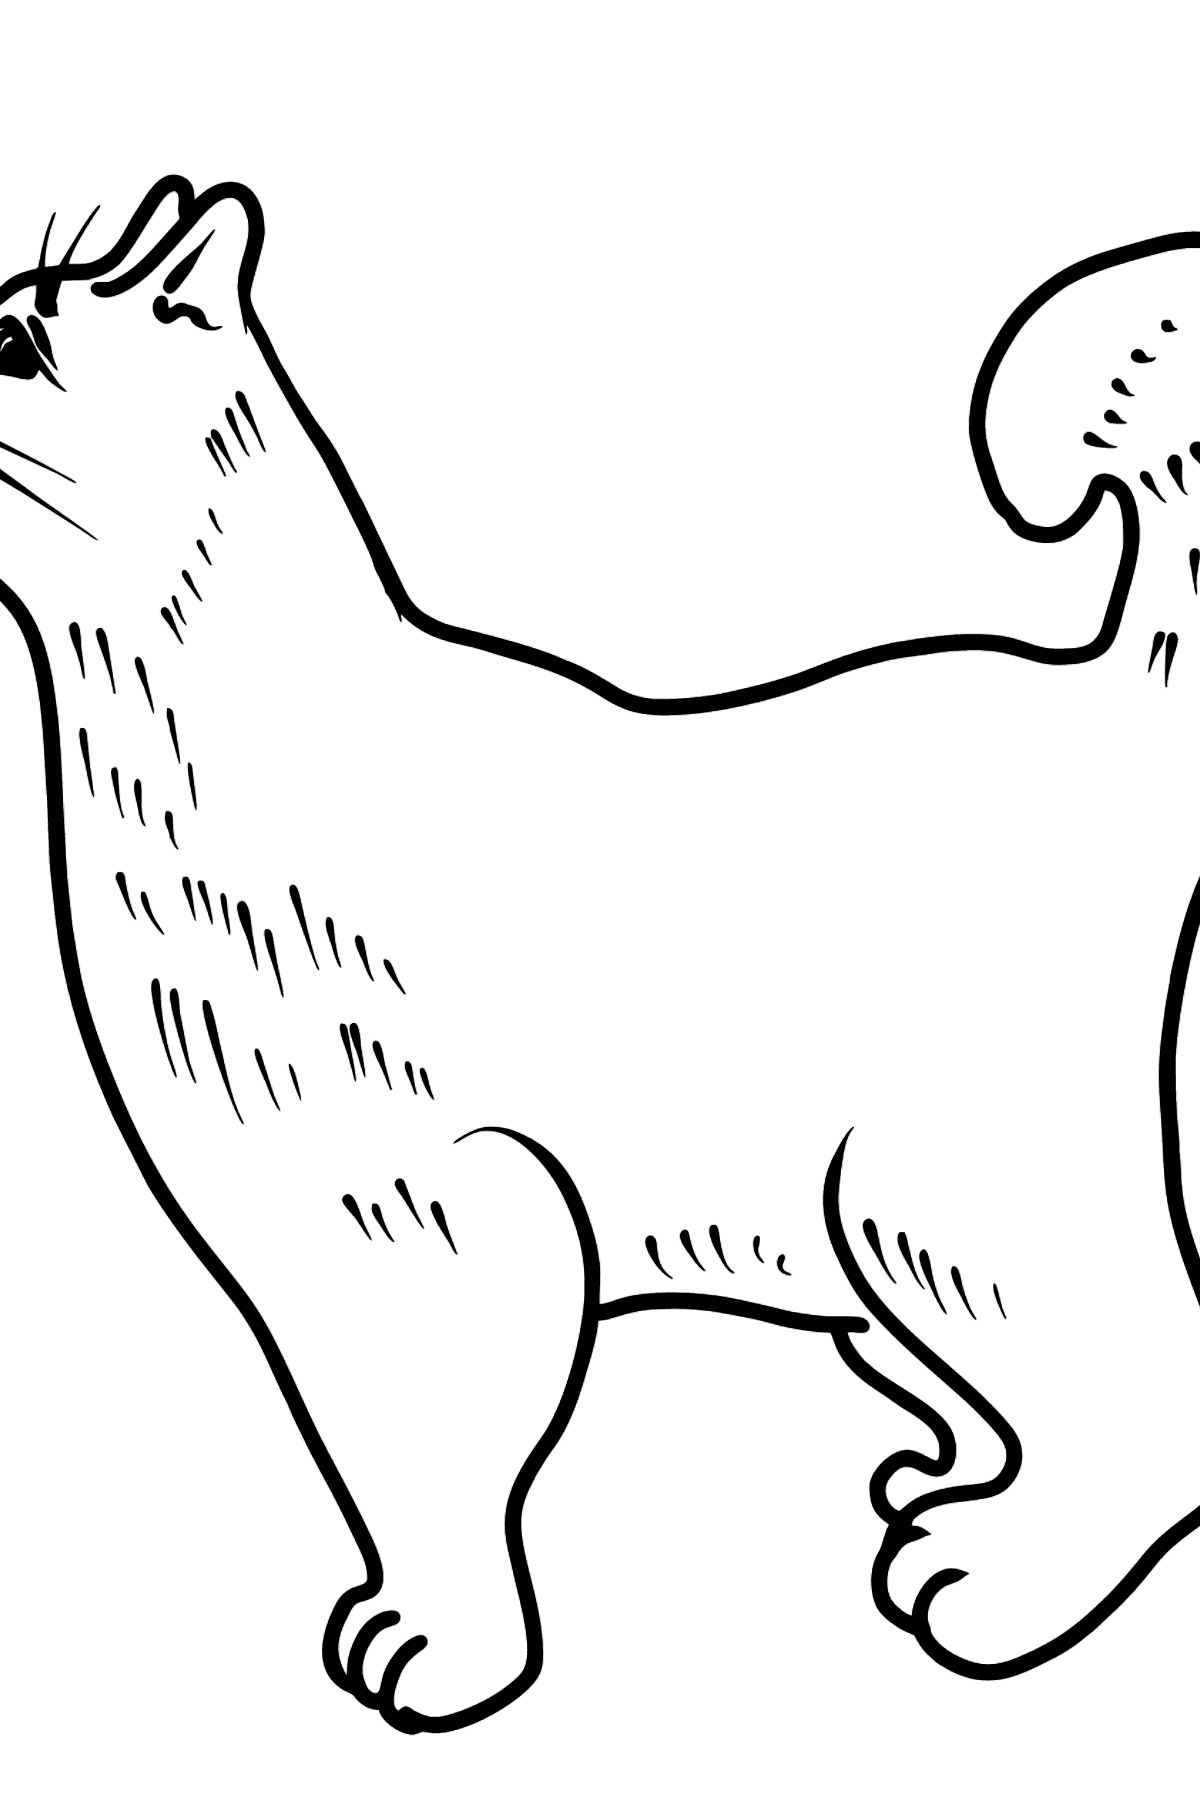 Cat coloring page - Coloring Pages for Kids